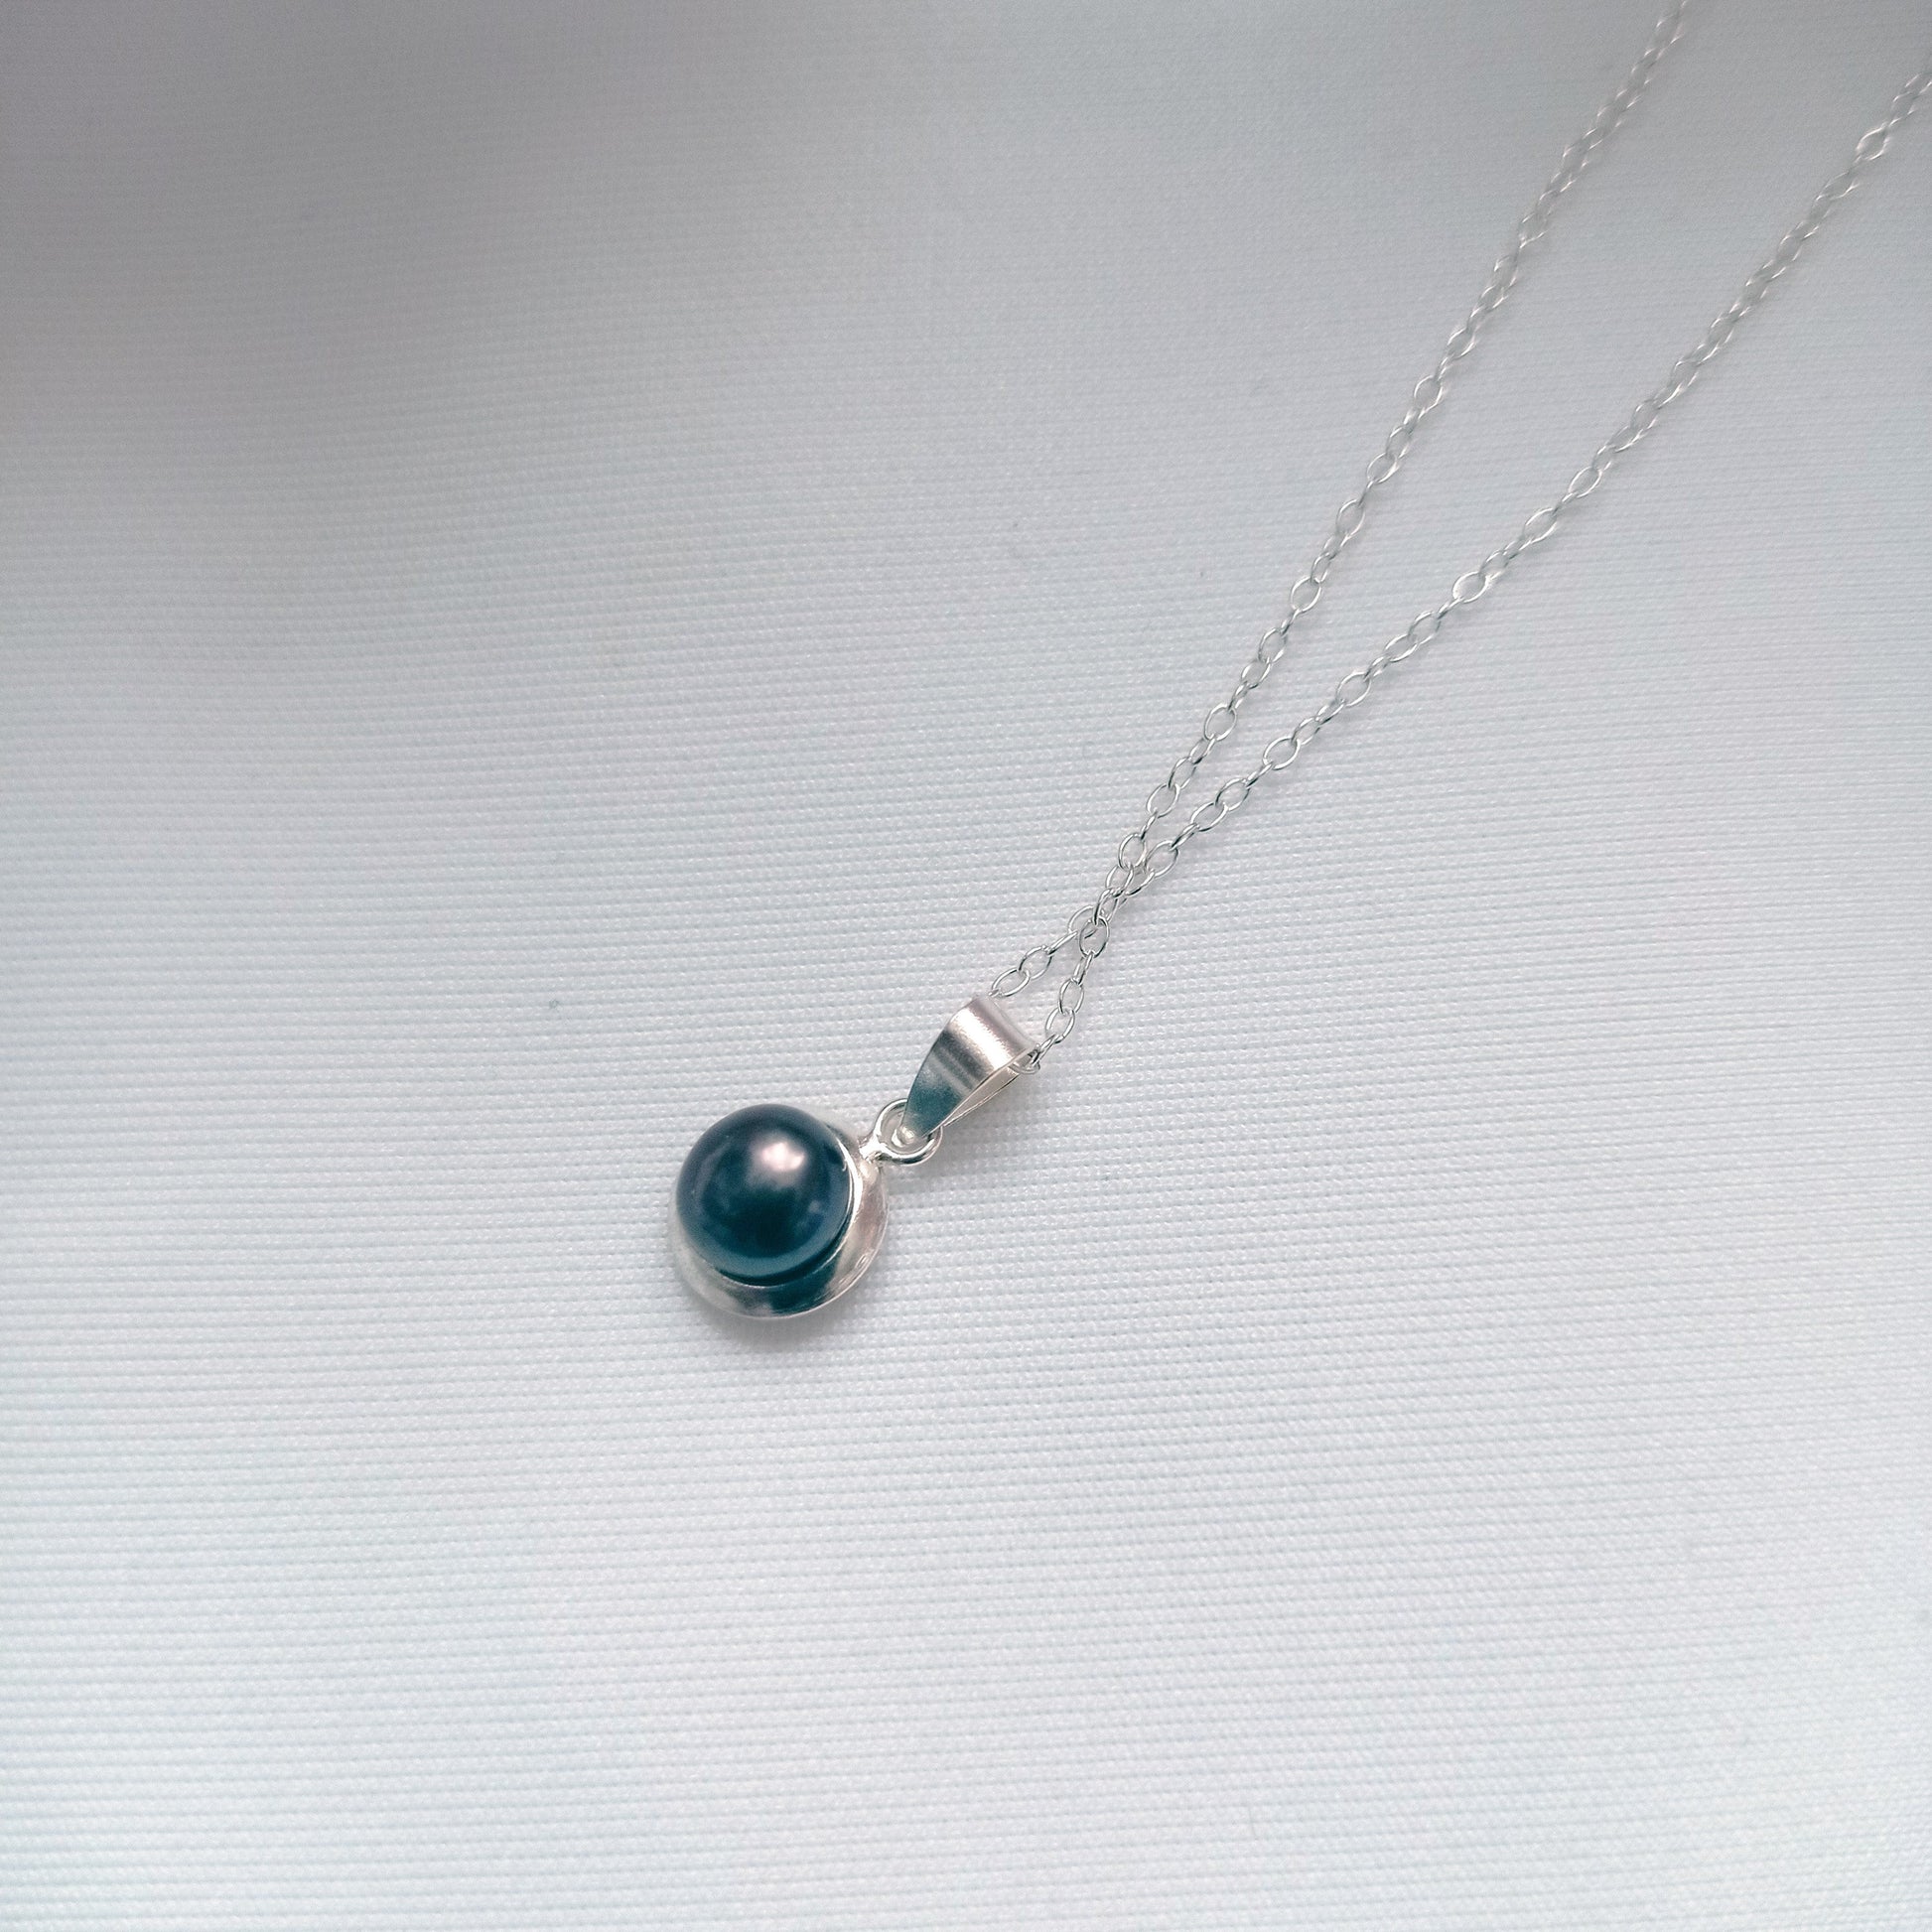 Black Freshwater Pearl Encased In Sterling Silver, .925 Sterling Silver Necklace, Bloom Collection | by nlanlaVictory-1